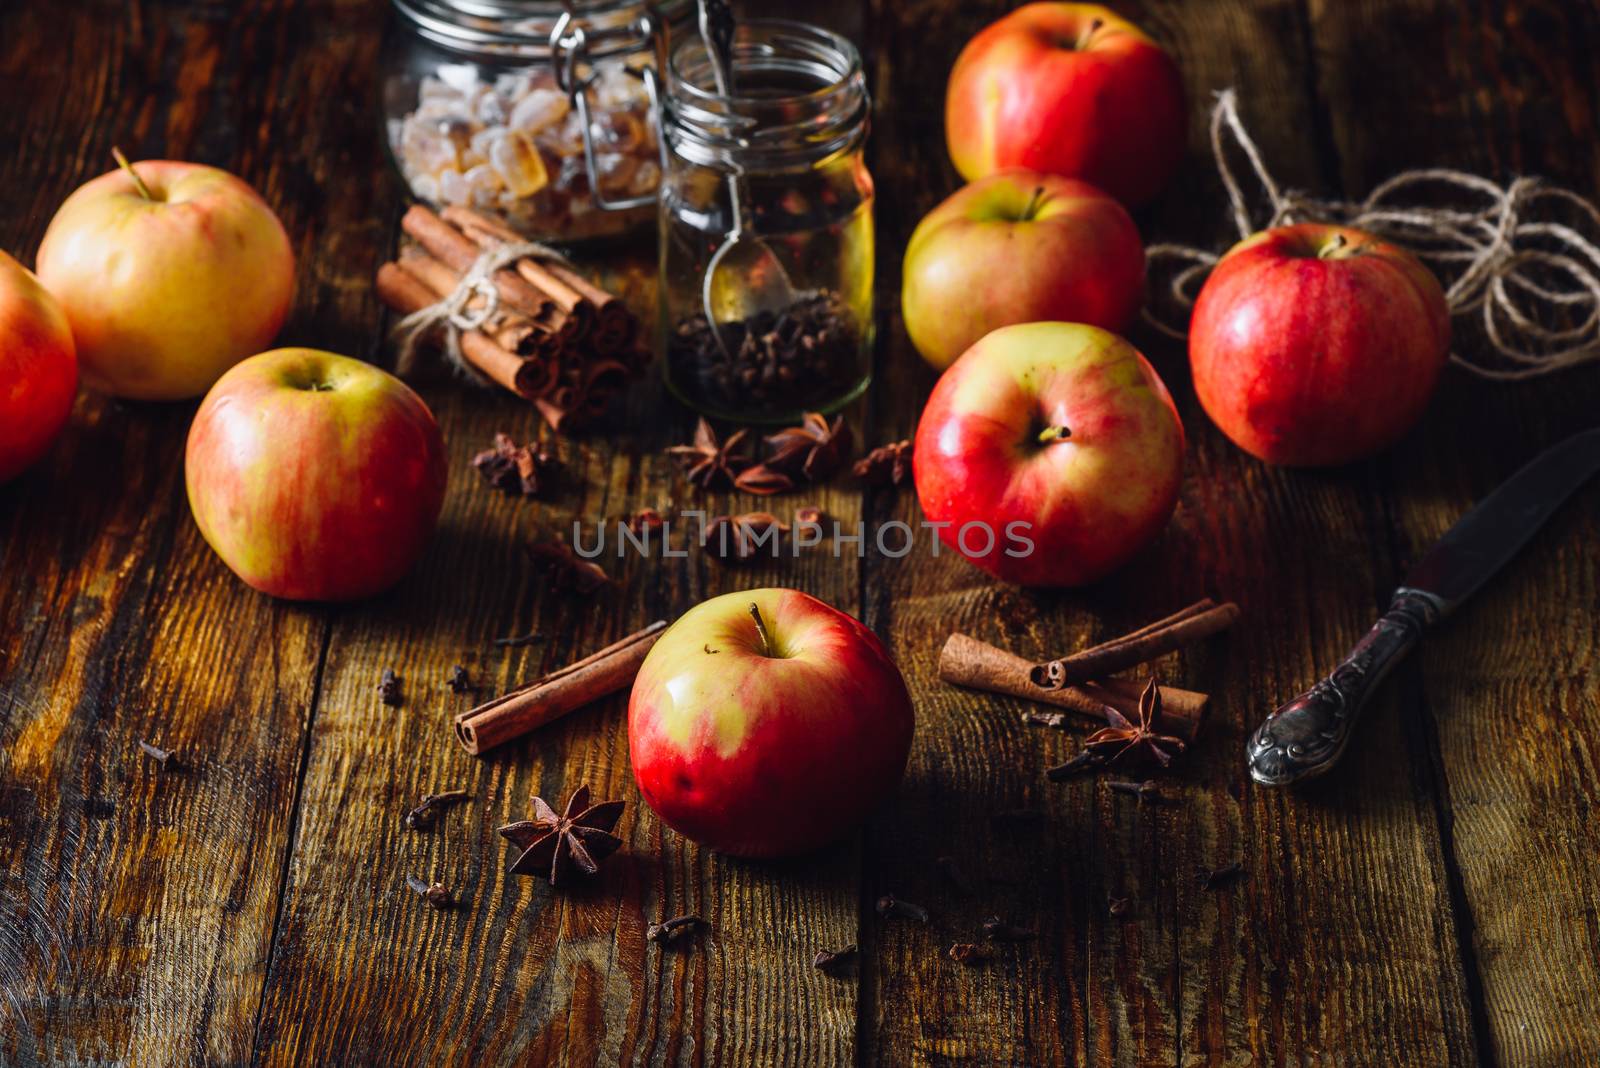 Red Apples with Different Spices for Cooking Apple Grog.